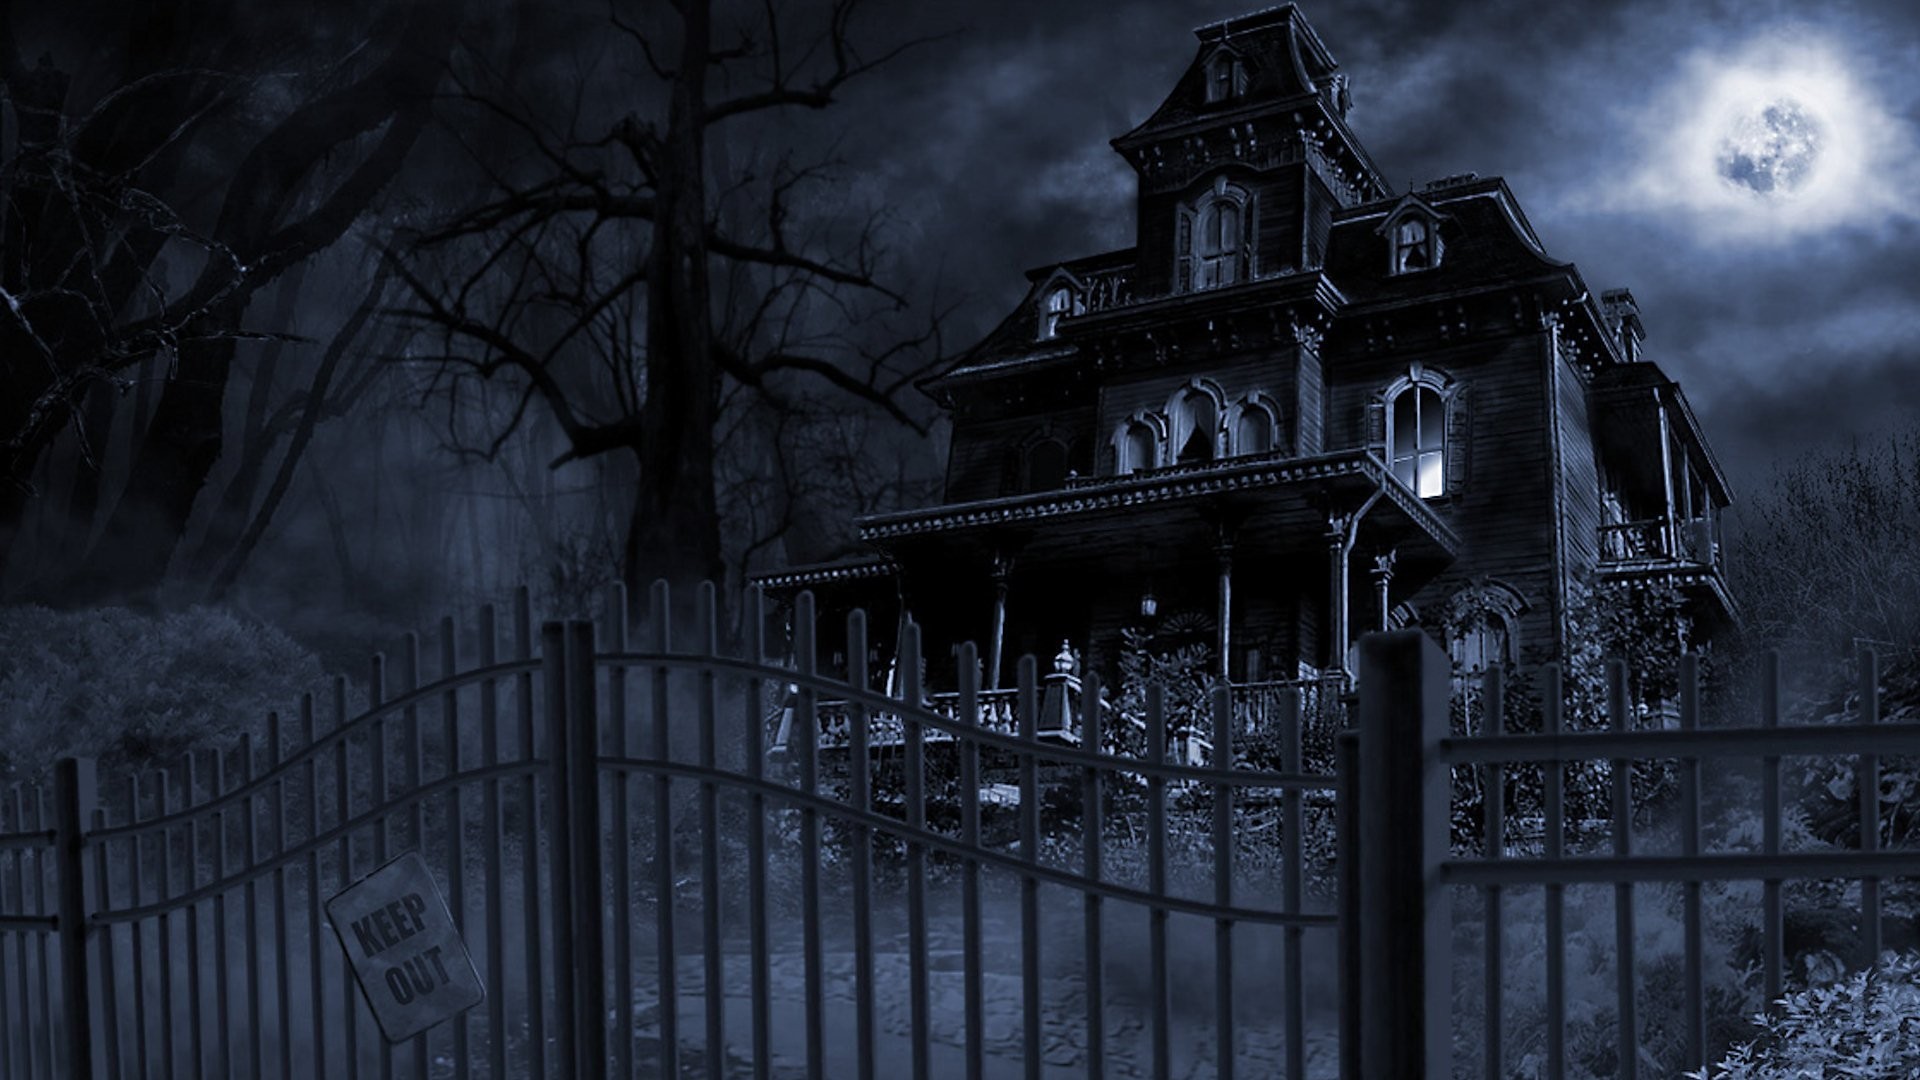 1920x1080 Check out our list of haunted Houses, Ghost Tours, Spooky Story Times and  other Scary Attractions in Dallas/Fort Worth!